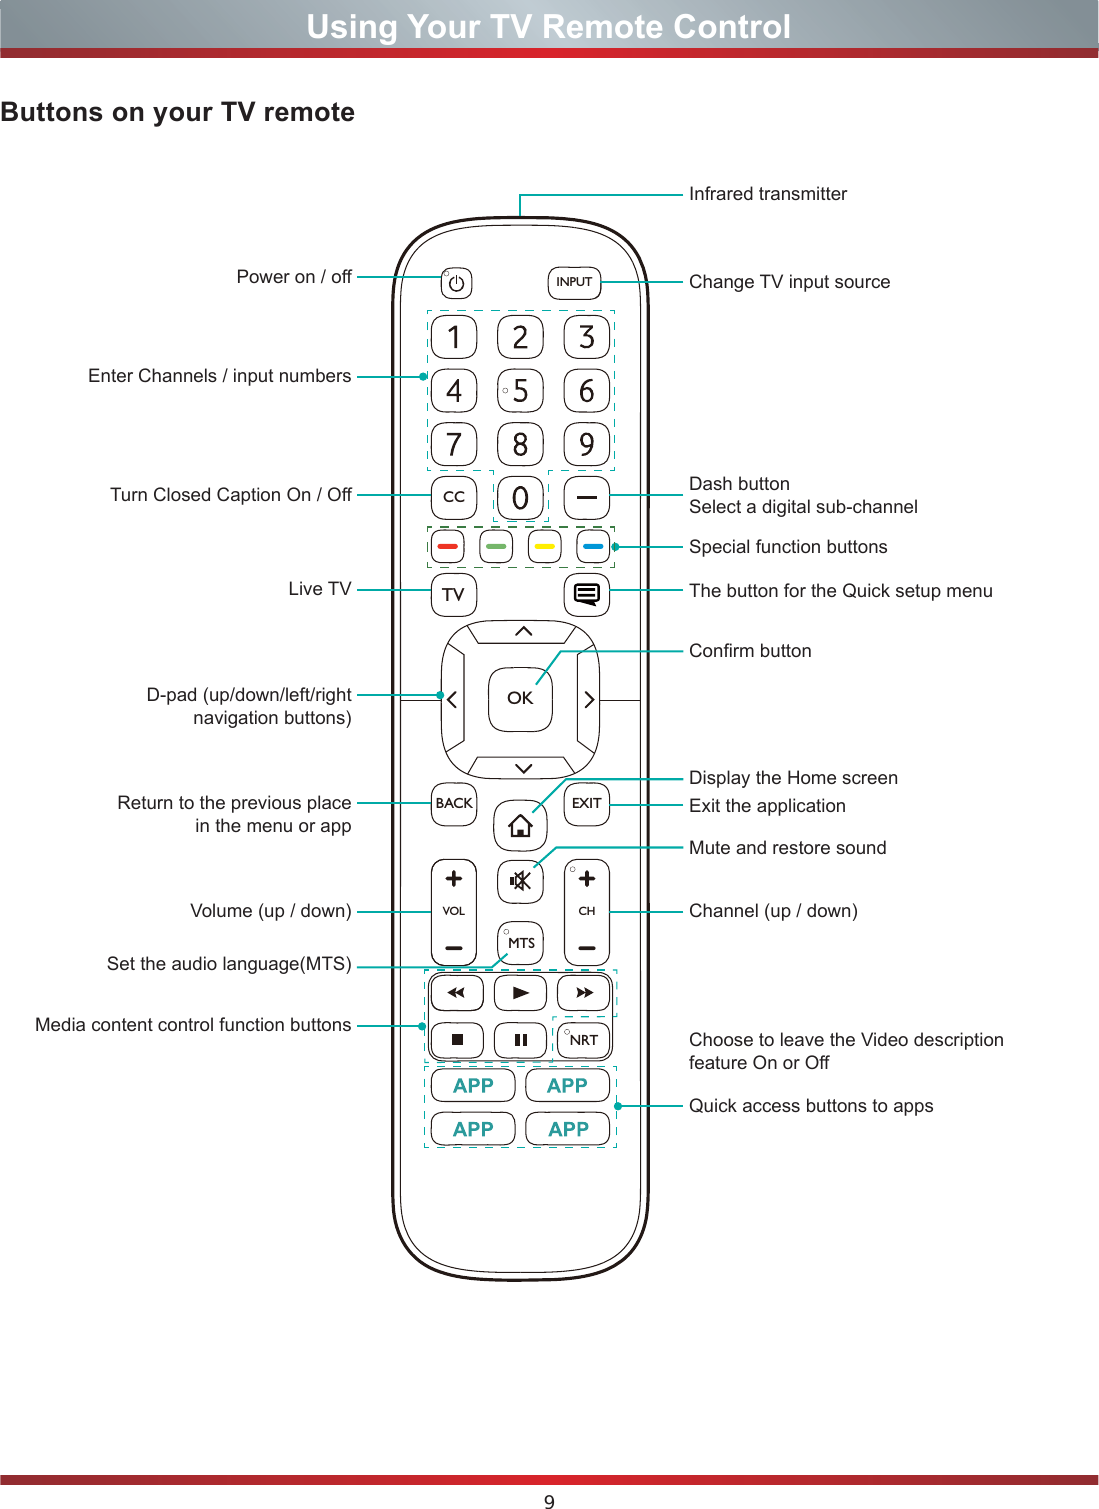 9Using Your TV Remote ControlButtons on your TV remoteVOL CHOKCCBACKTVEXITINPUTMTSNRTPower on / oEnter Channels / input numbersMedia content control function buttonsDash button Select a digital sub-channelD-pad (up/down/left/right navigation buttons)Volume (up / down)Set the audio language(MTS)Choose to leave the Video description feature On or OLive TVReturn to the previous place in the menu or appMute and restore soundInfrared transmitterChange TV input sourceChannel (up / down)Exit the applicationTurn Closed Caption On / OSpecial function buttonsThe button for the Quick setup menuDisplay the Home screenConrm buttonQuick access buttons to apps